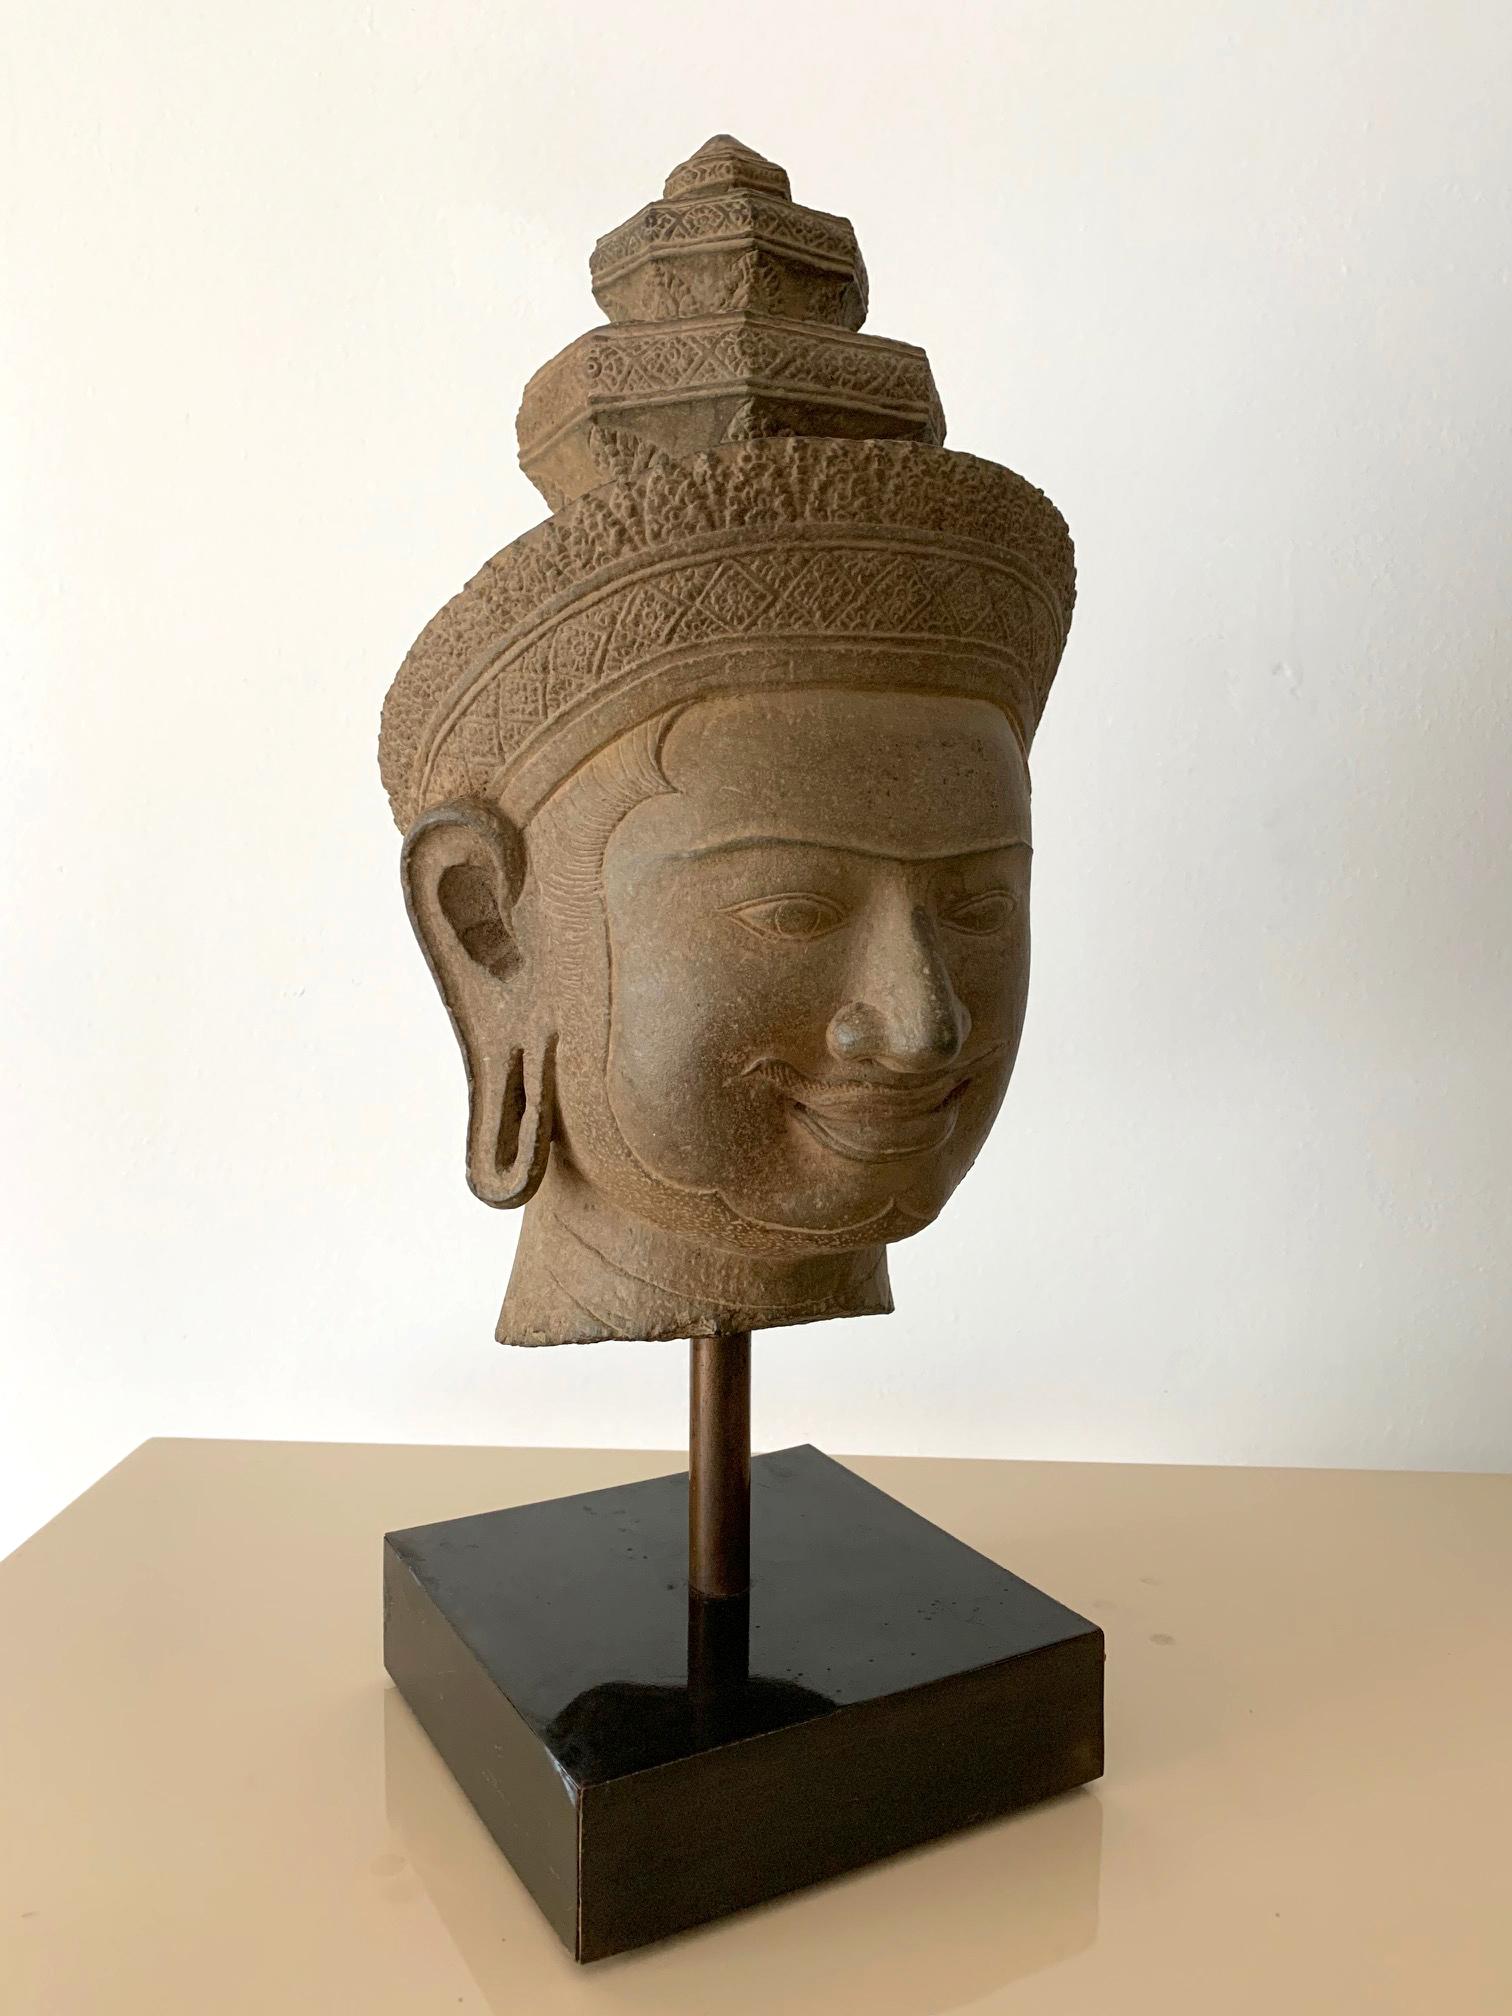 A finely carved sandstone head of Vishnu from Khmer Kingdom (now Cambodia) in Preah Koh style, circa late 9th century. The Hindu god was depicted with a gentle facial expression of serenity. His widely set eyes of almond shape and slightly upturn